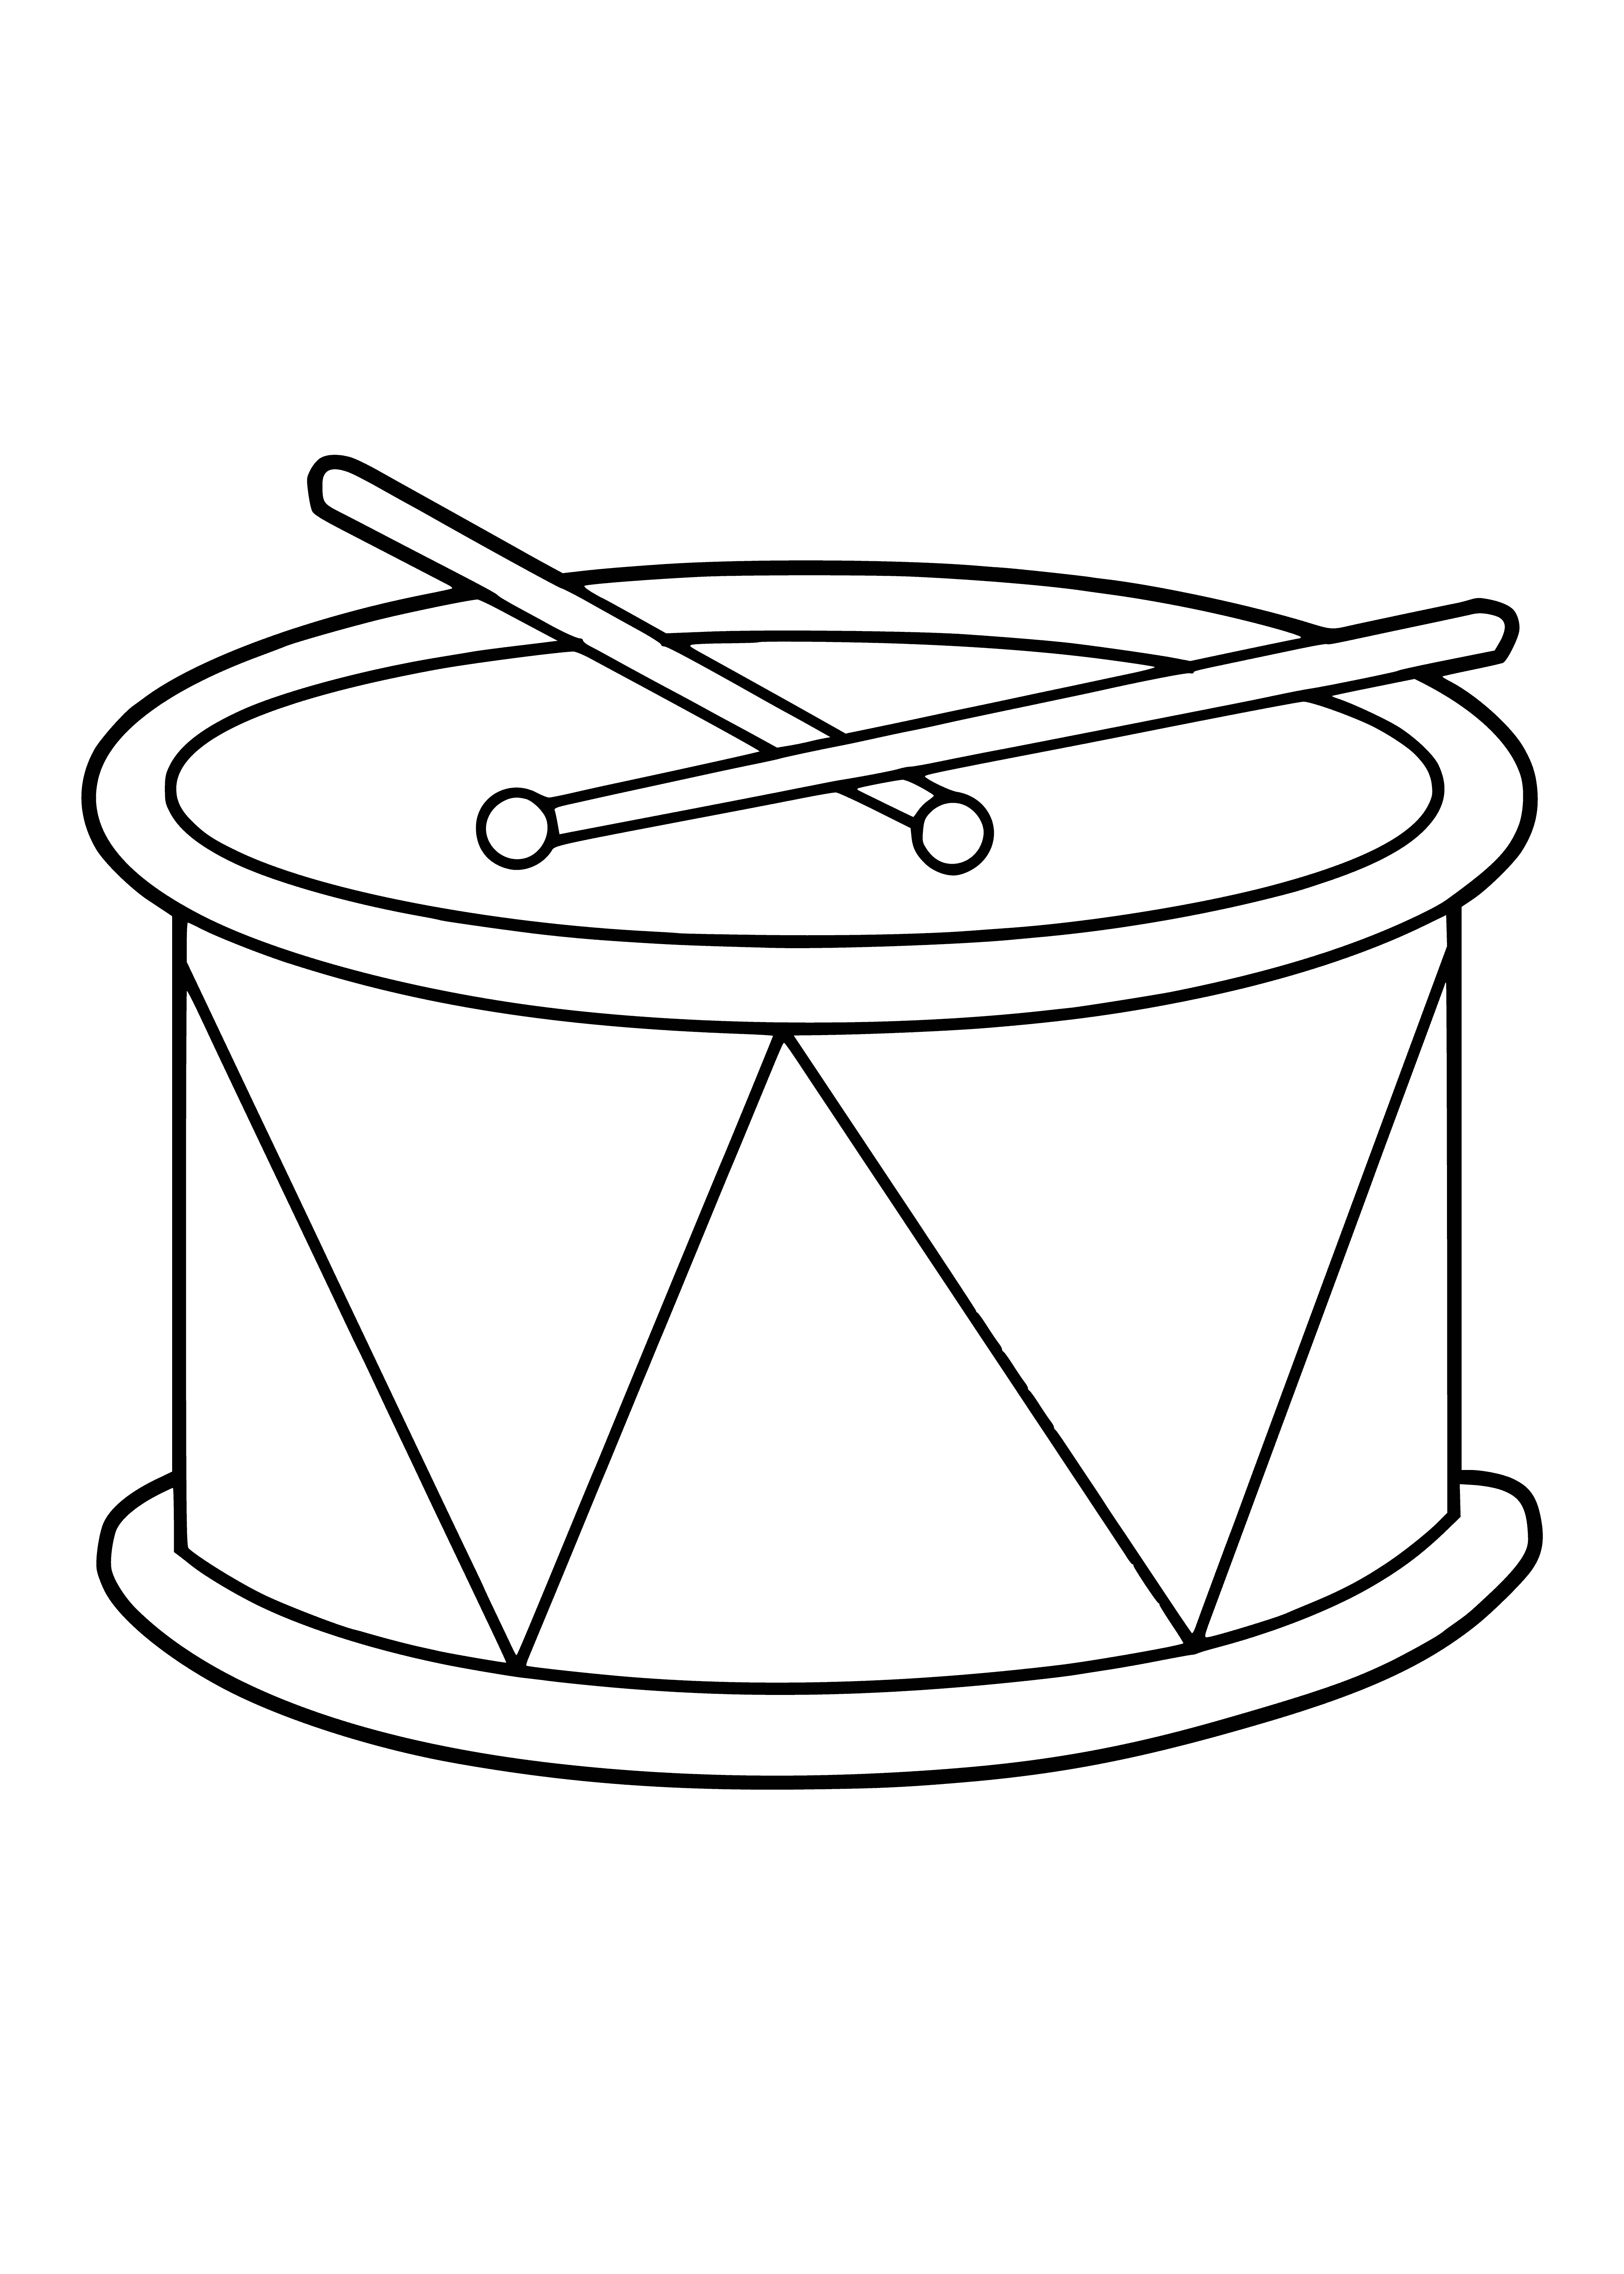 coloring page: Playing the drum creates a deep, reverberating sound by striking the round, cylindrical animal hide-covered instrument with hands or sticks. #drum #drumming